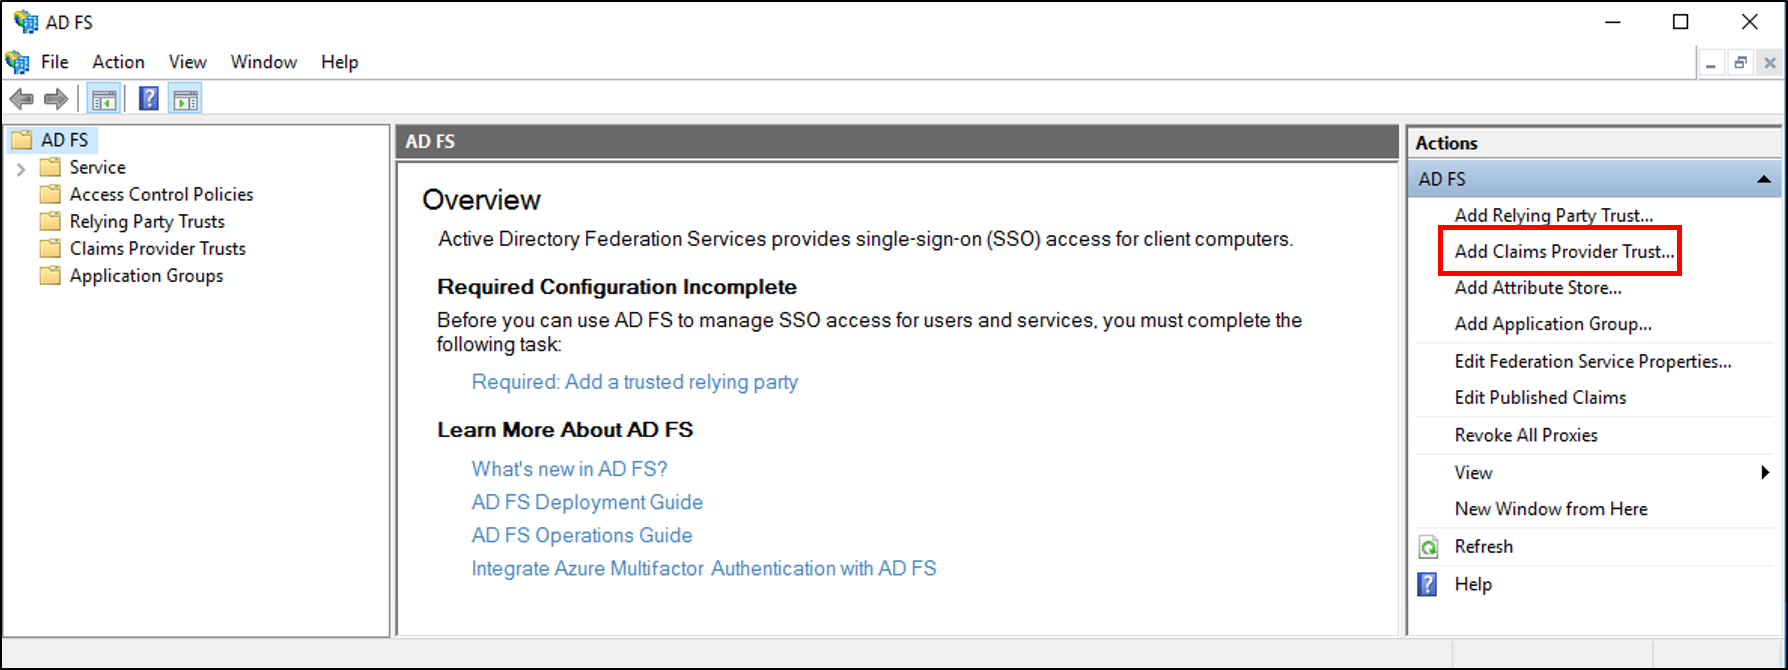 Screenshot that highlights the Add Claims Provider Trust action.